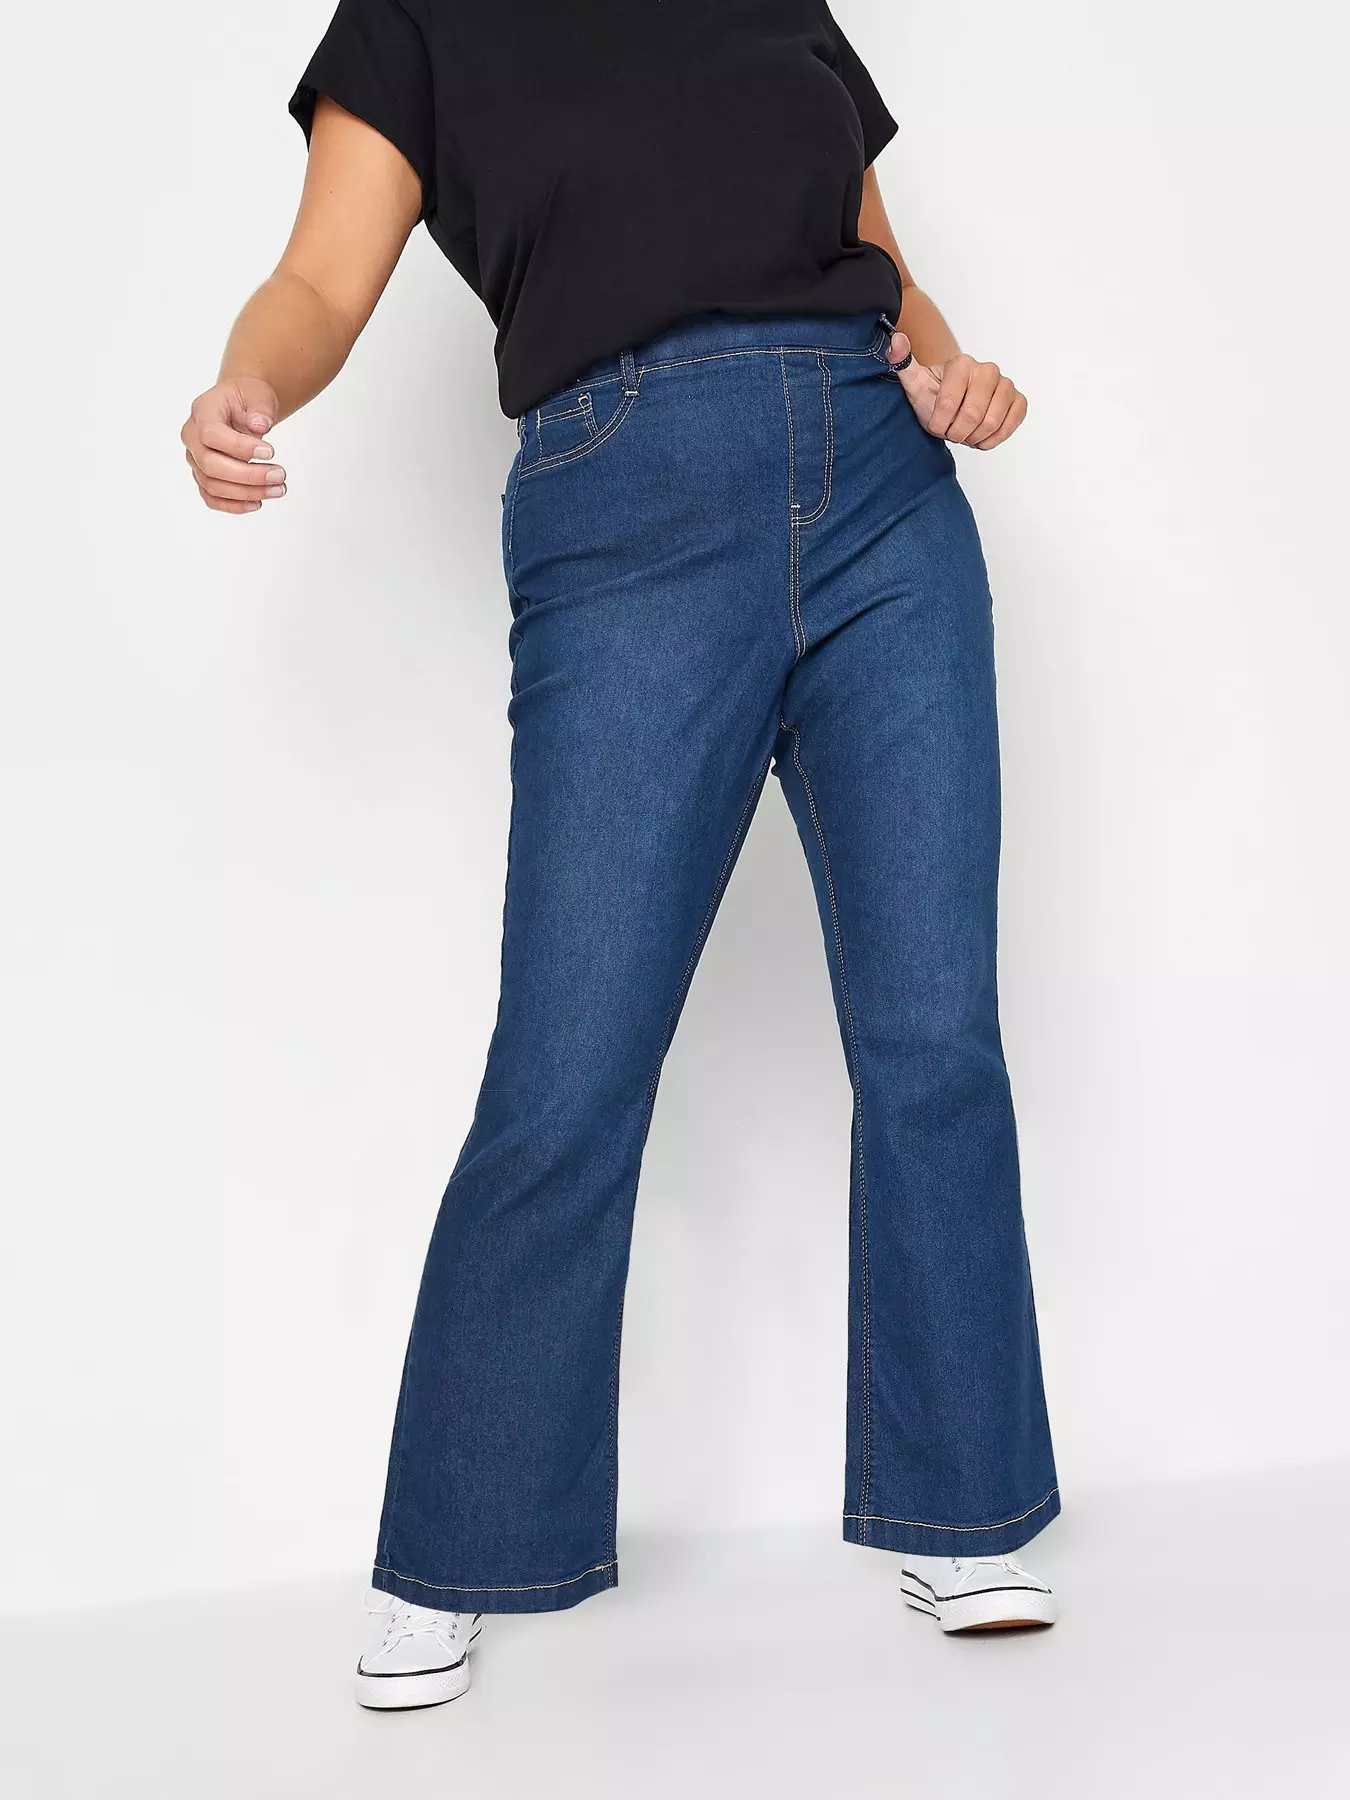 Yours Lola Bum Shaper Jegging - Mid Blue